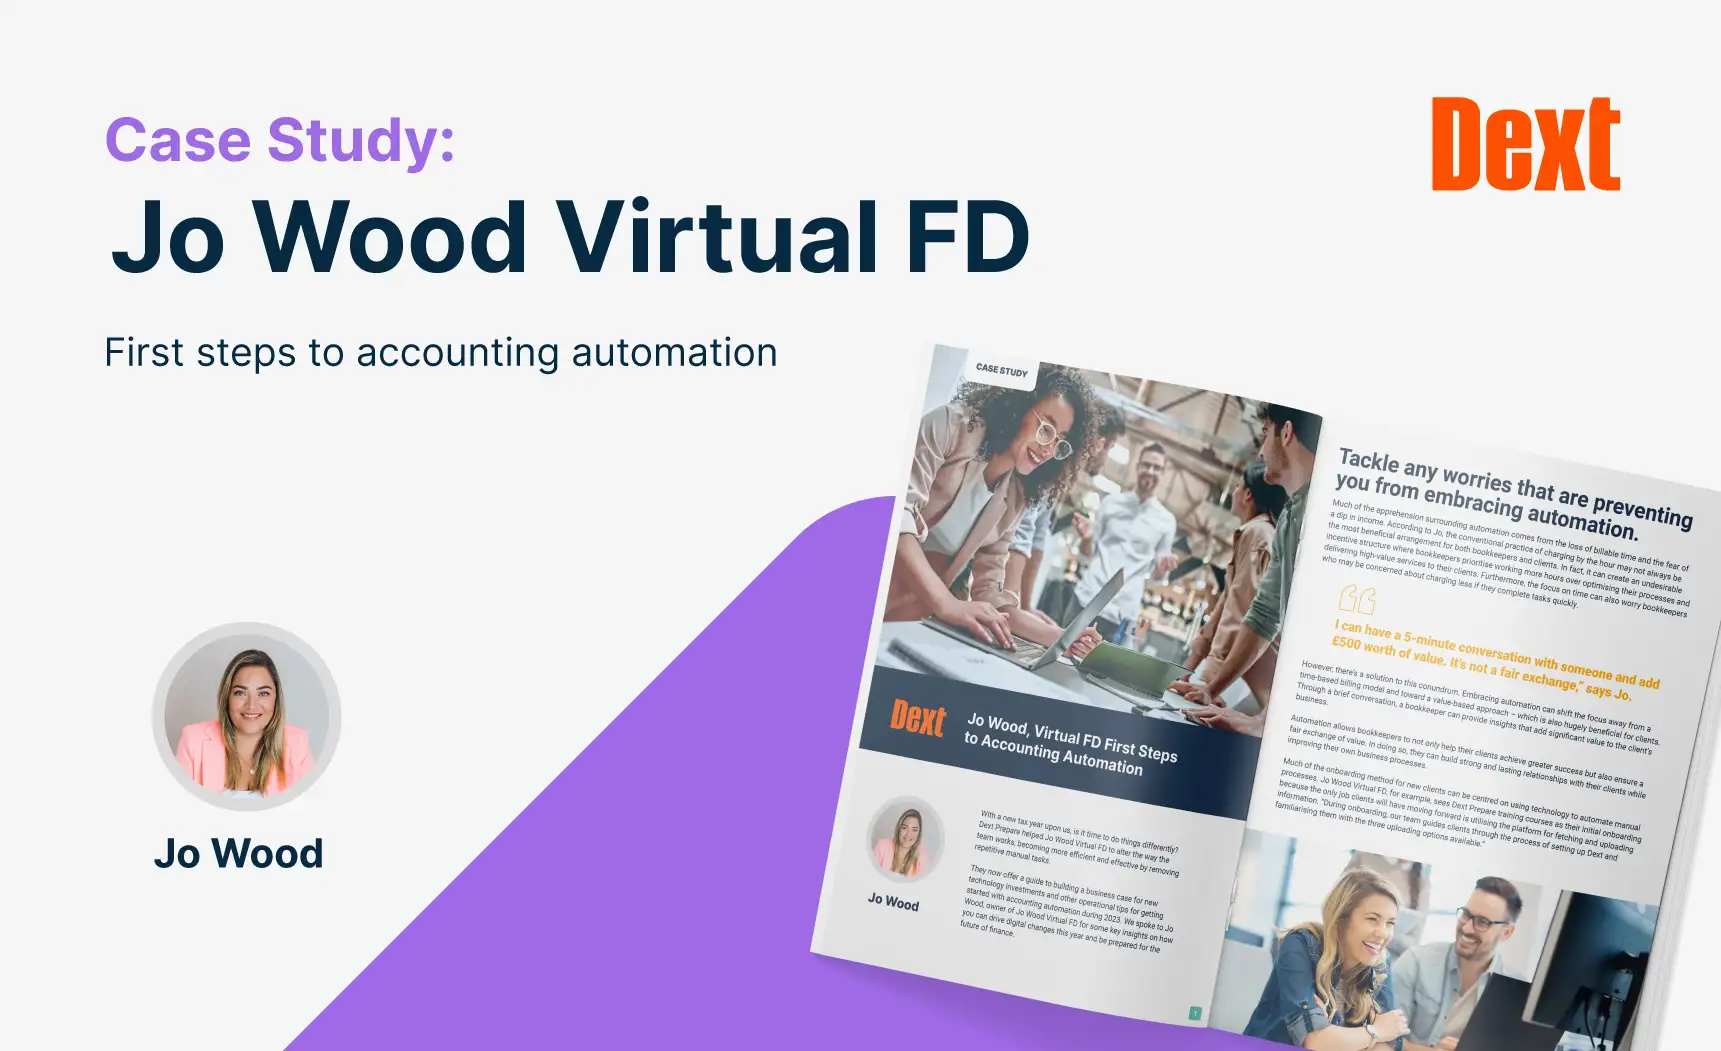 Jo Wood Virtual FD’s First Steps to Accounting Automation image